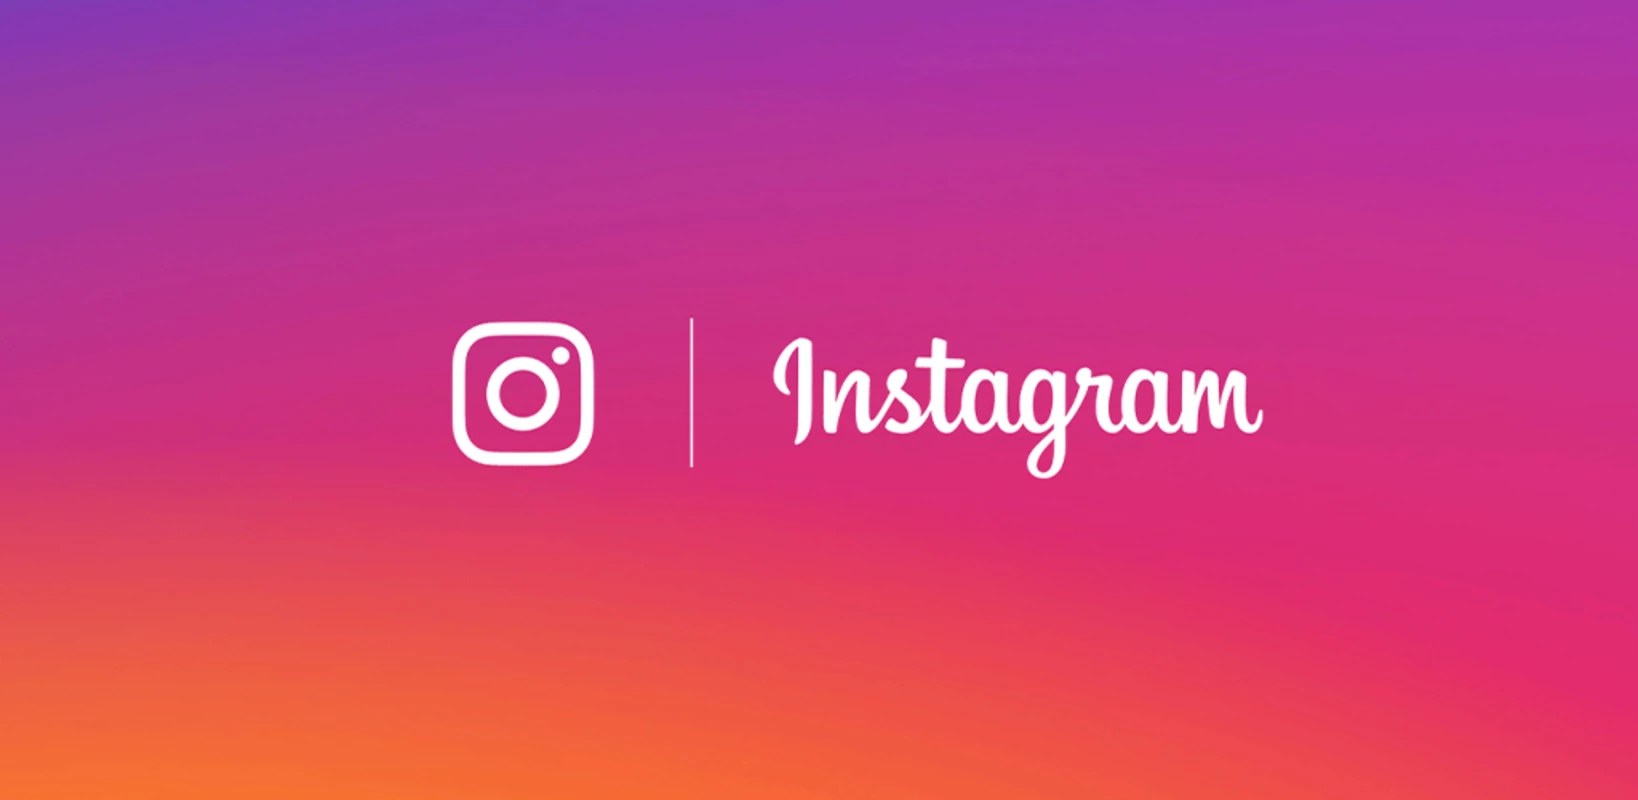 Instagram 324.0.0.27.50 APK for Android Screenshot 14